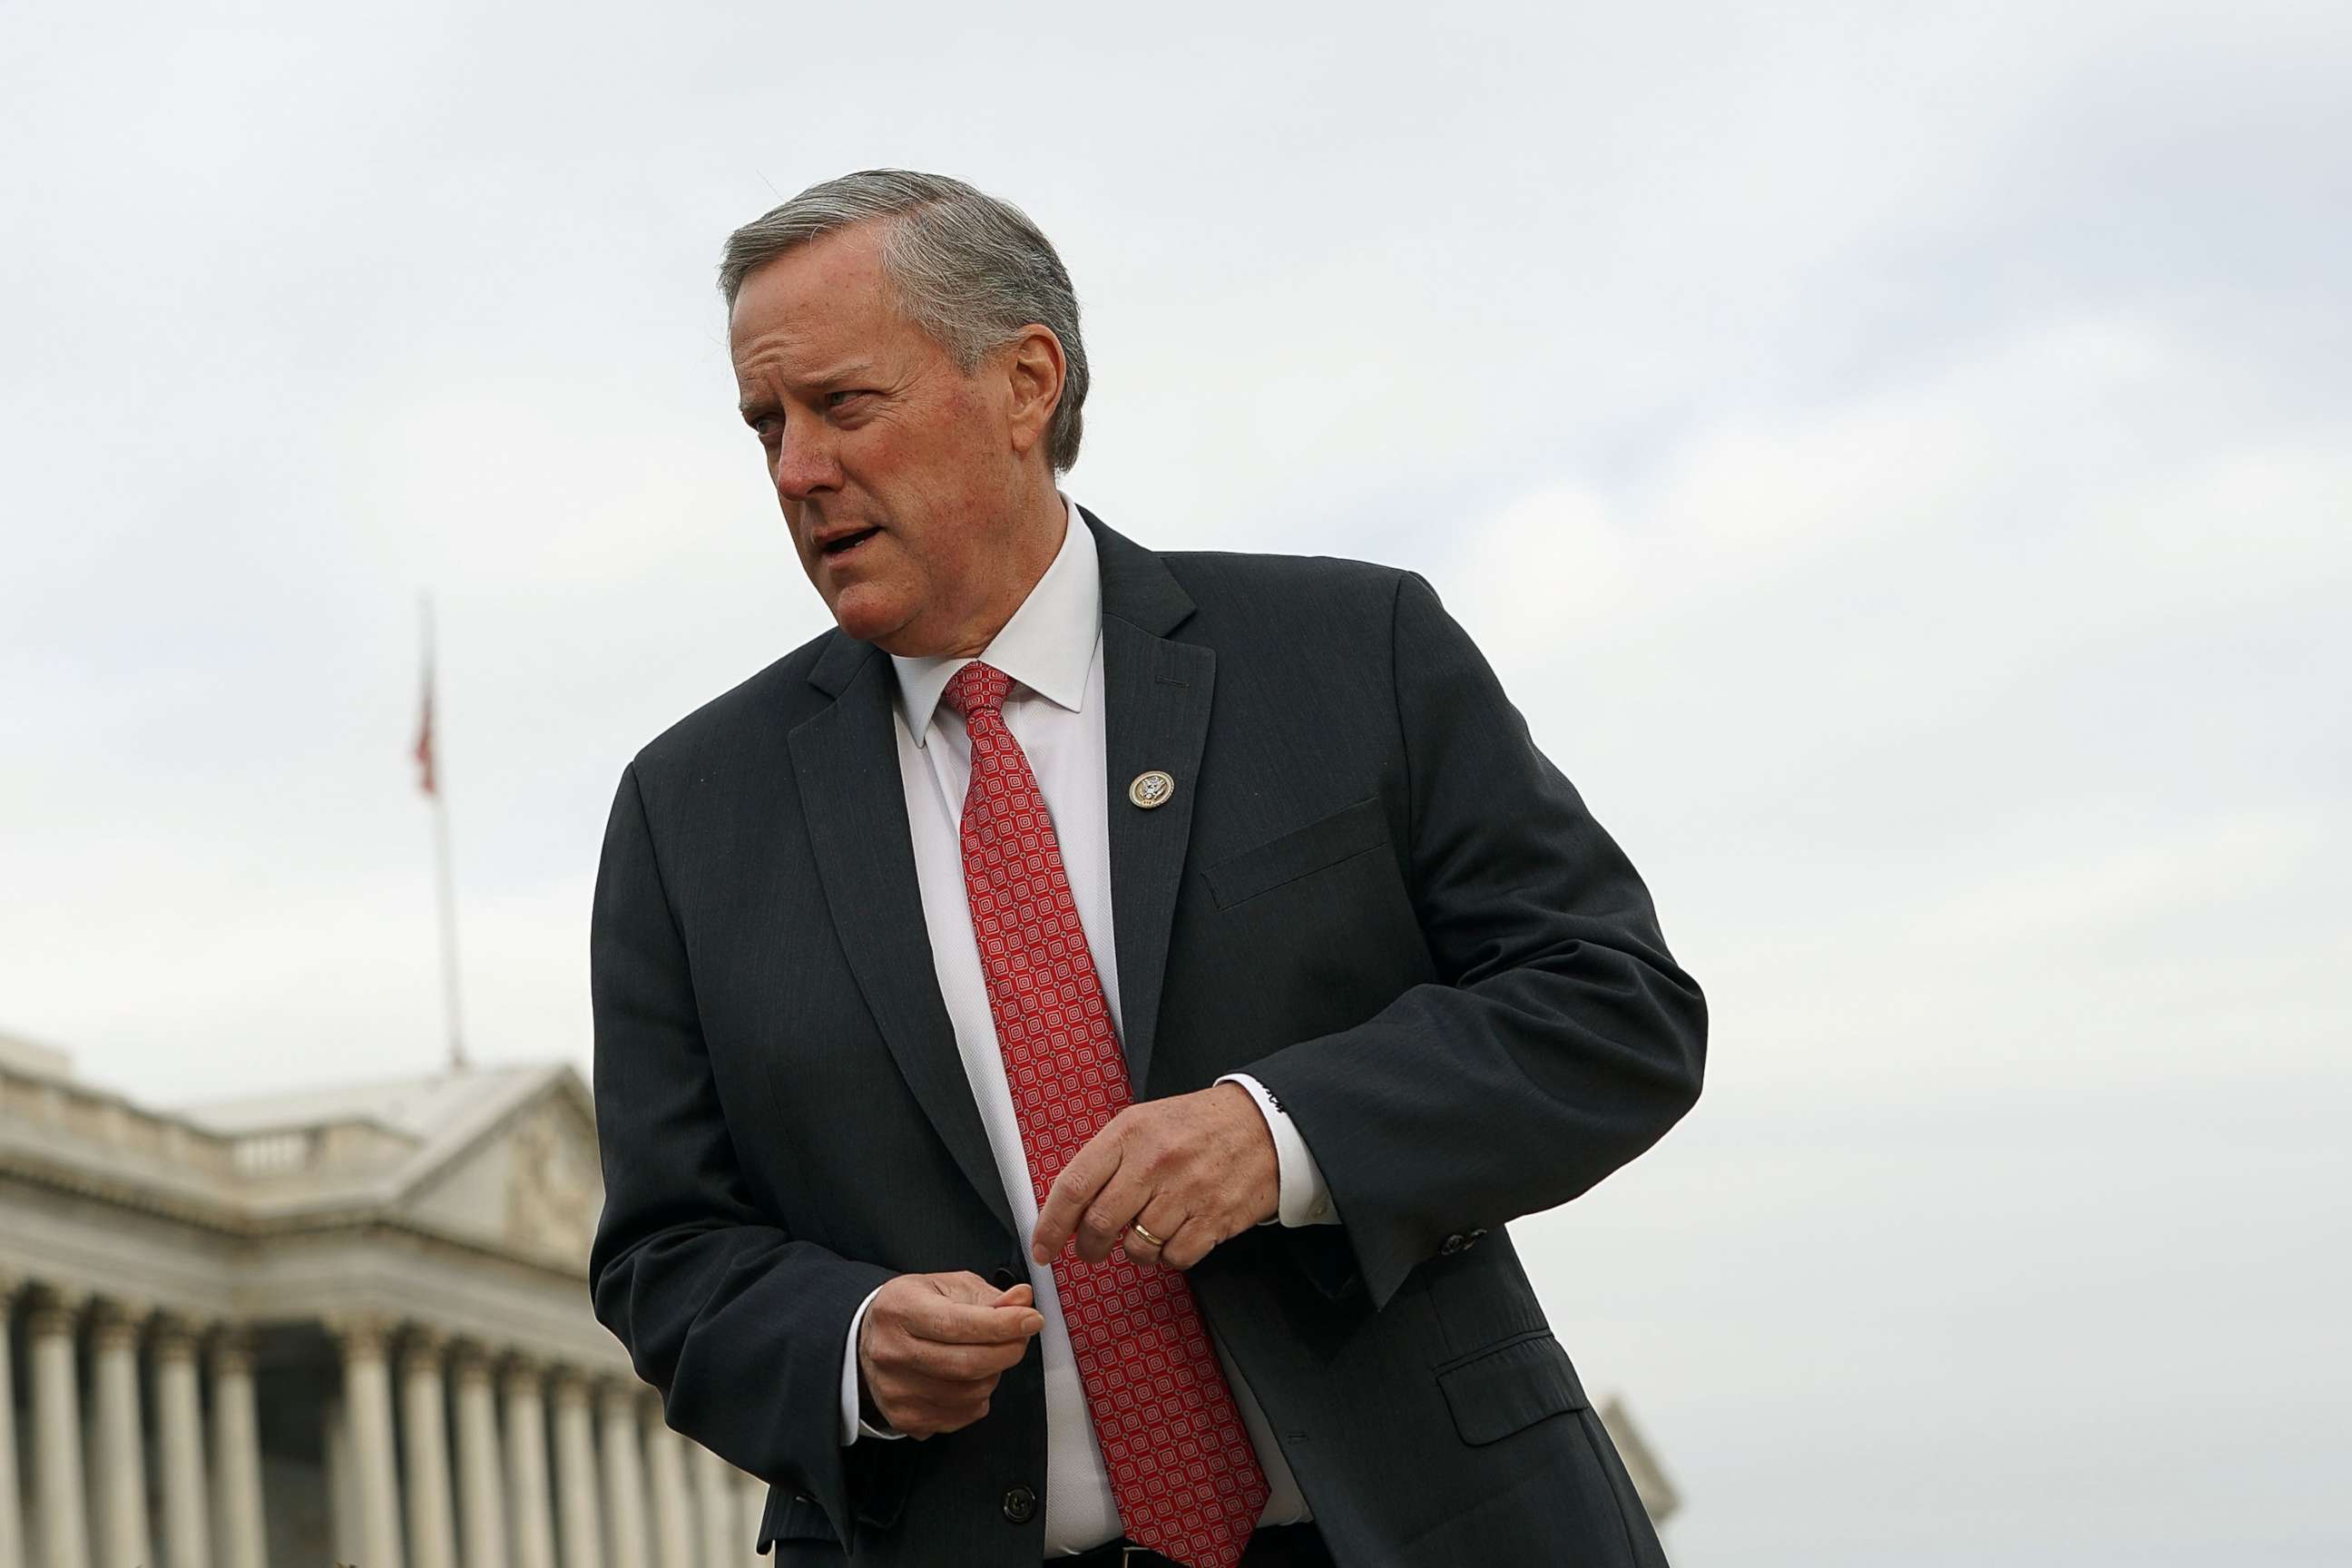 PHOTO: Rep. Mark Meadows arrives at a news conference in front of the Capitol, Dec. 6, 2017, in Washington.